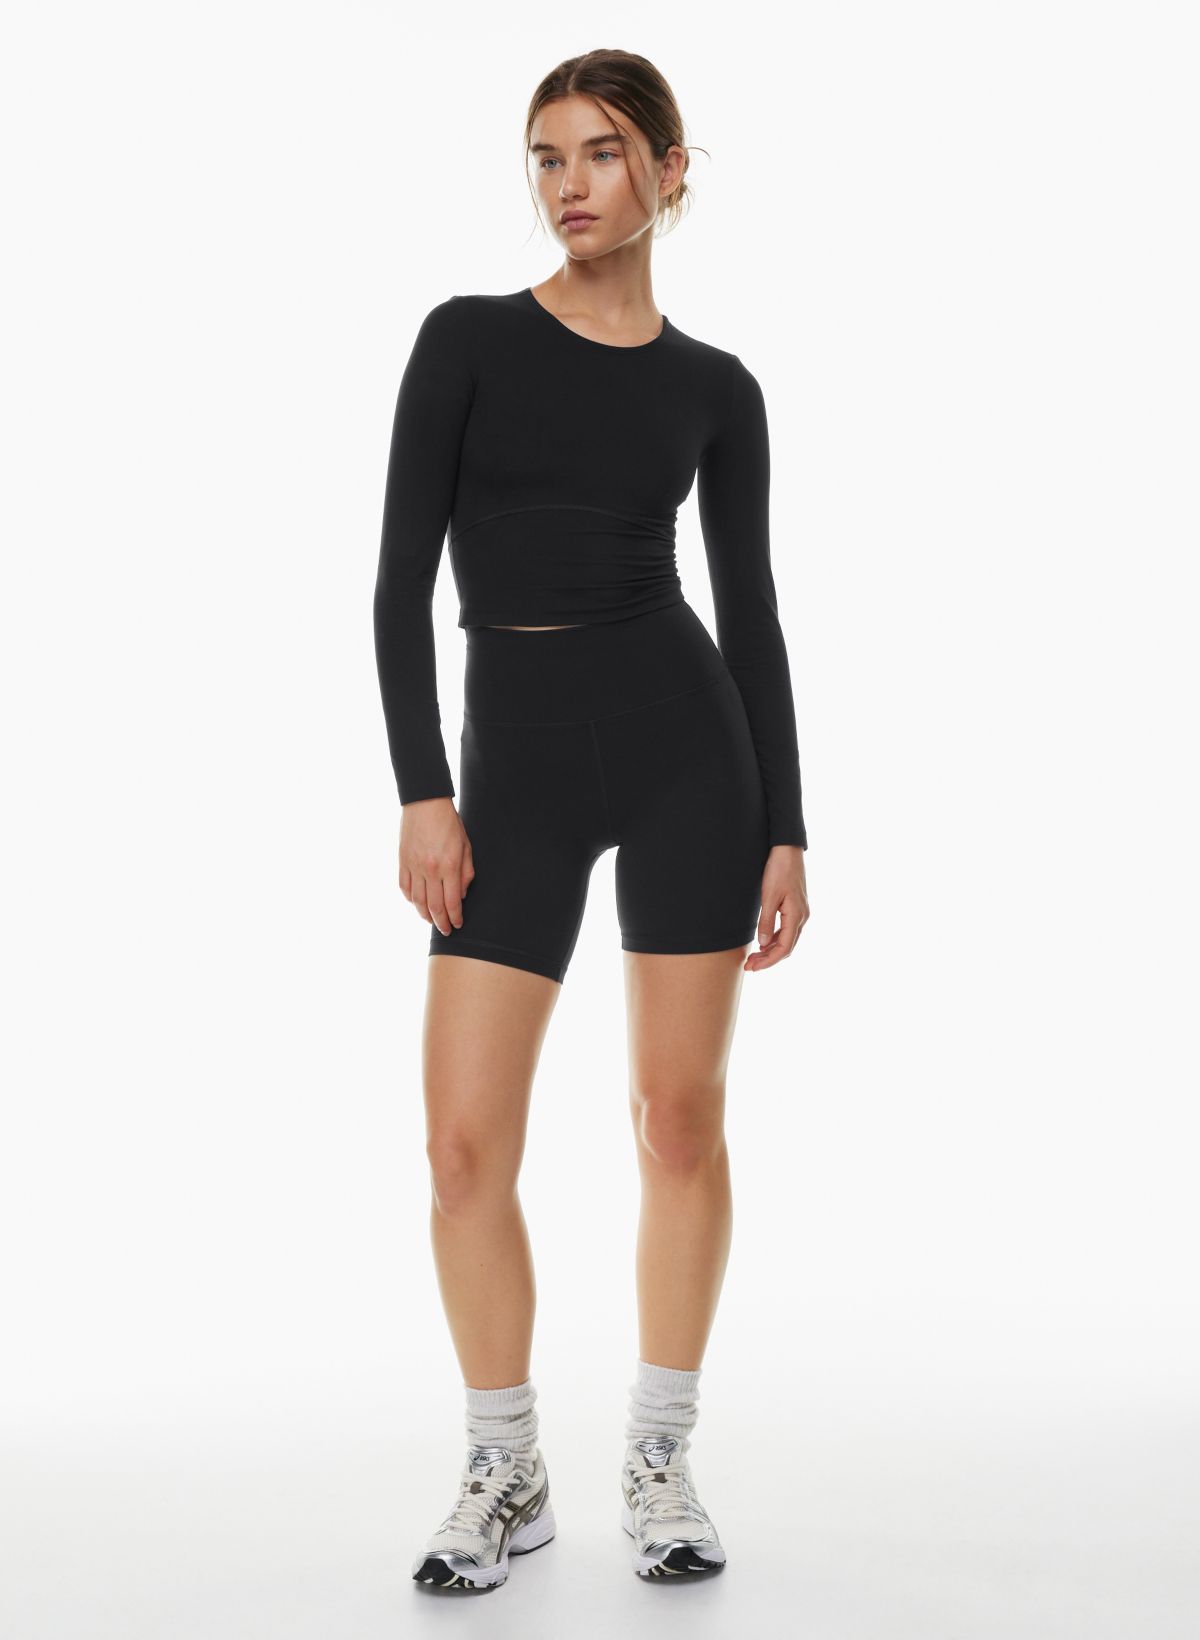 Need Tight Shorts? H&M Bike Shorts Are The Best - Emma